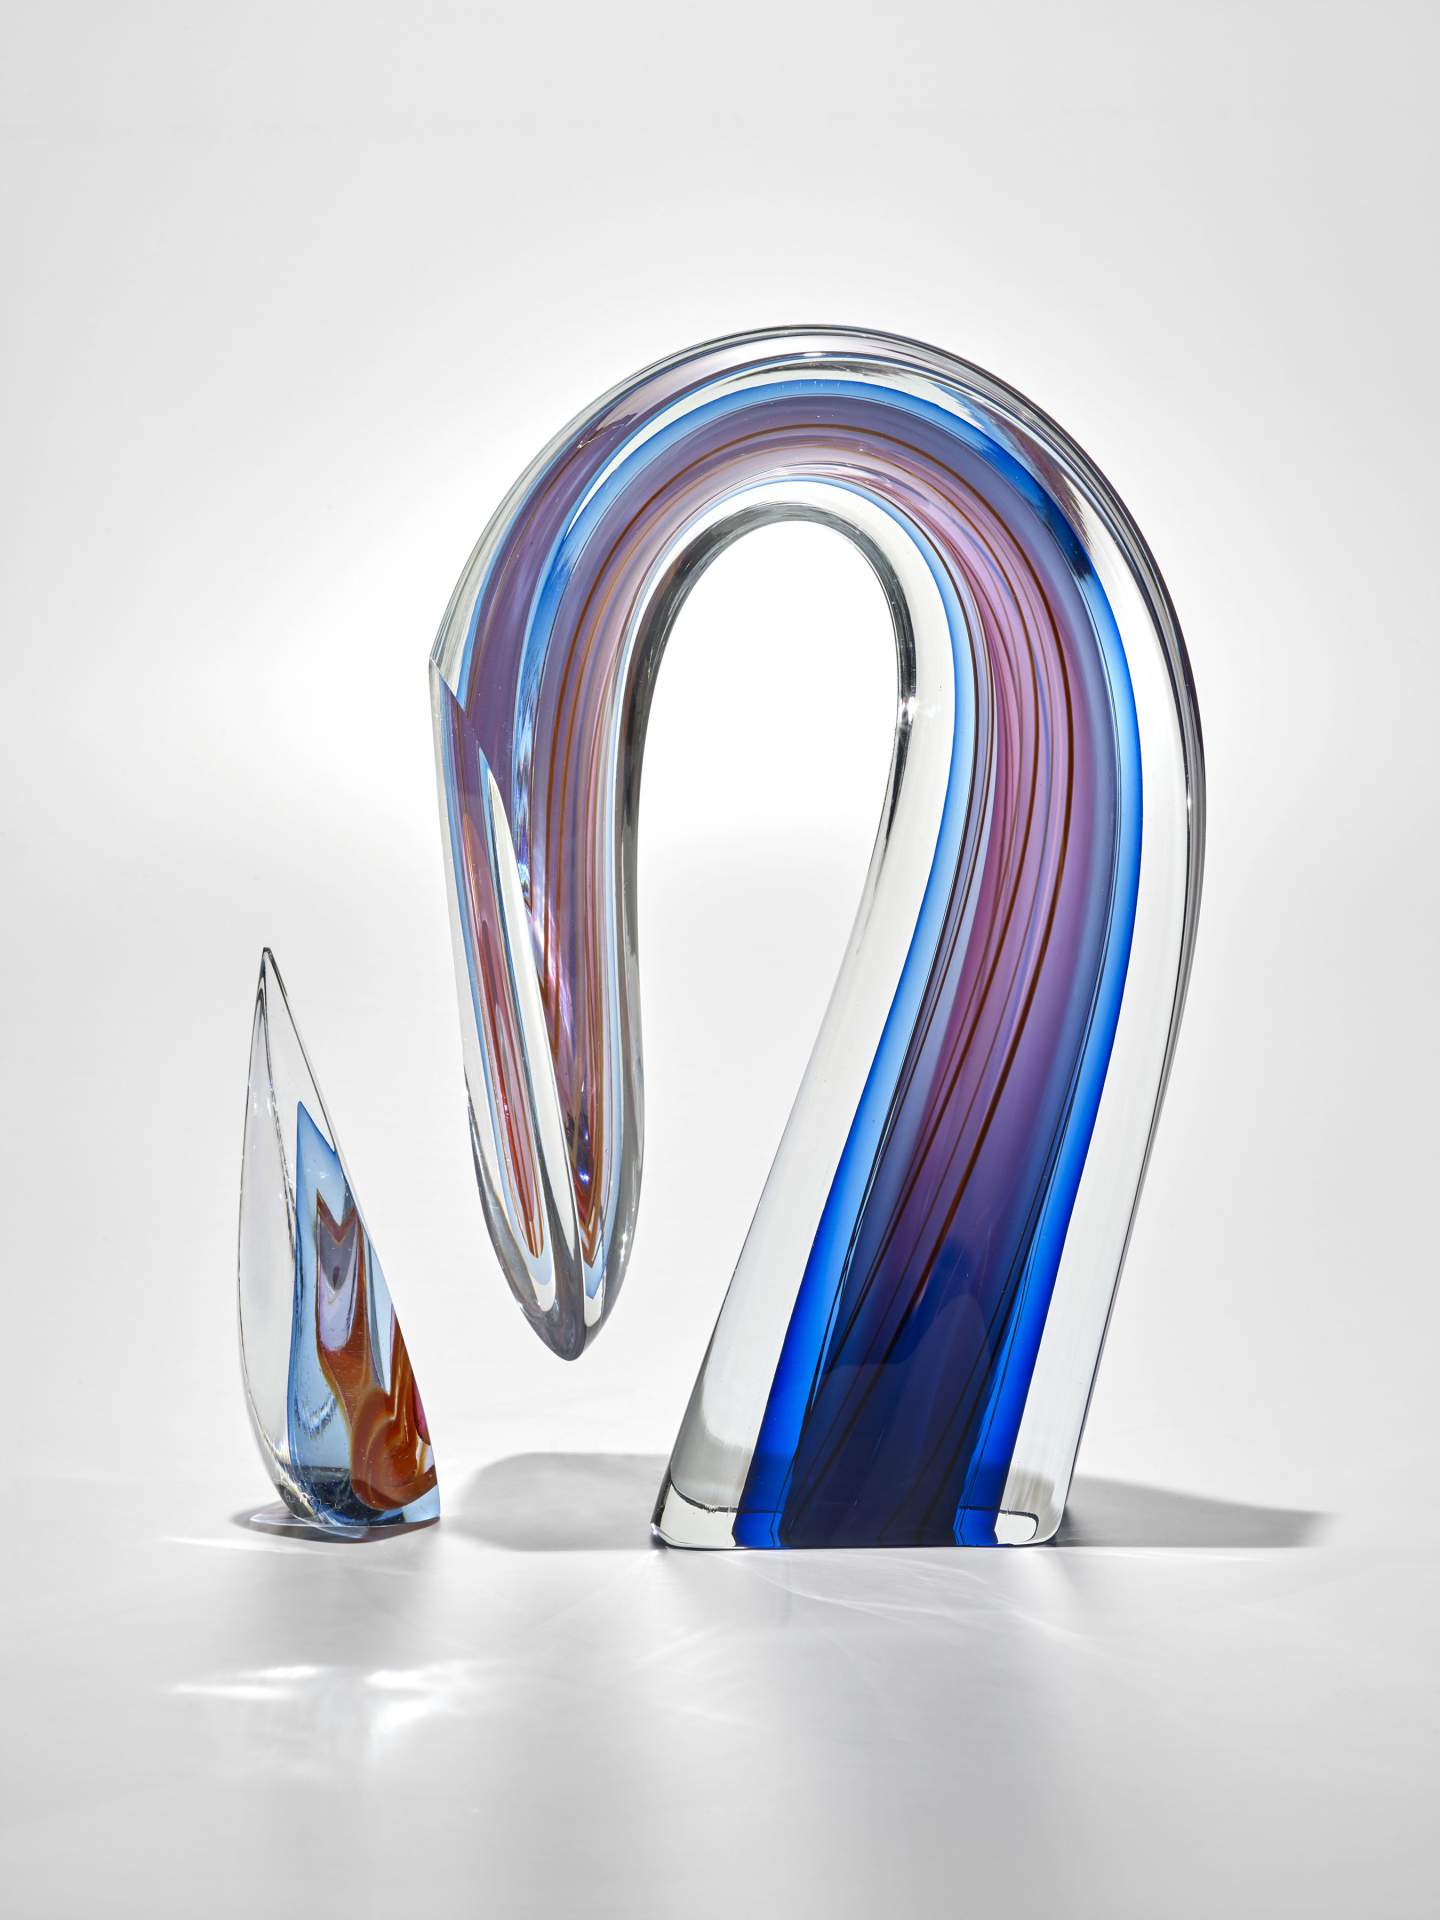 Exhibition Opening of Brilliance: The Stanford Lipsey Art Glass Collection Announced